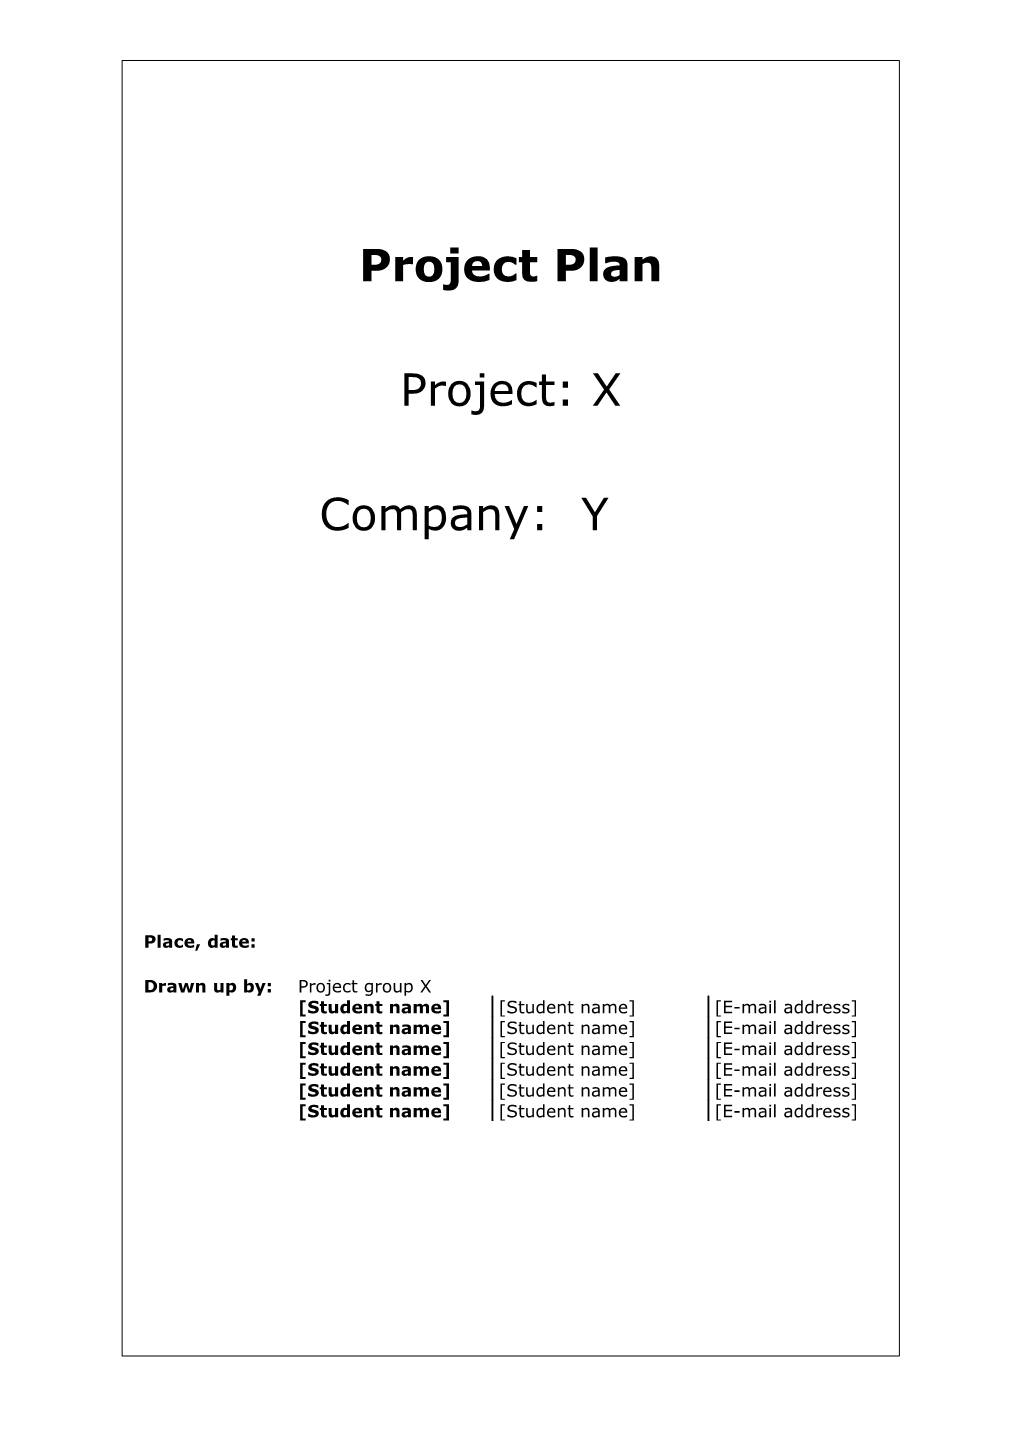 Table of Contents, Project Plan